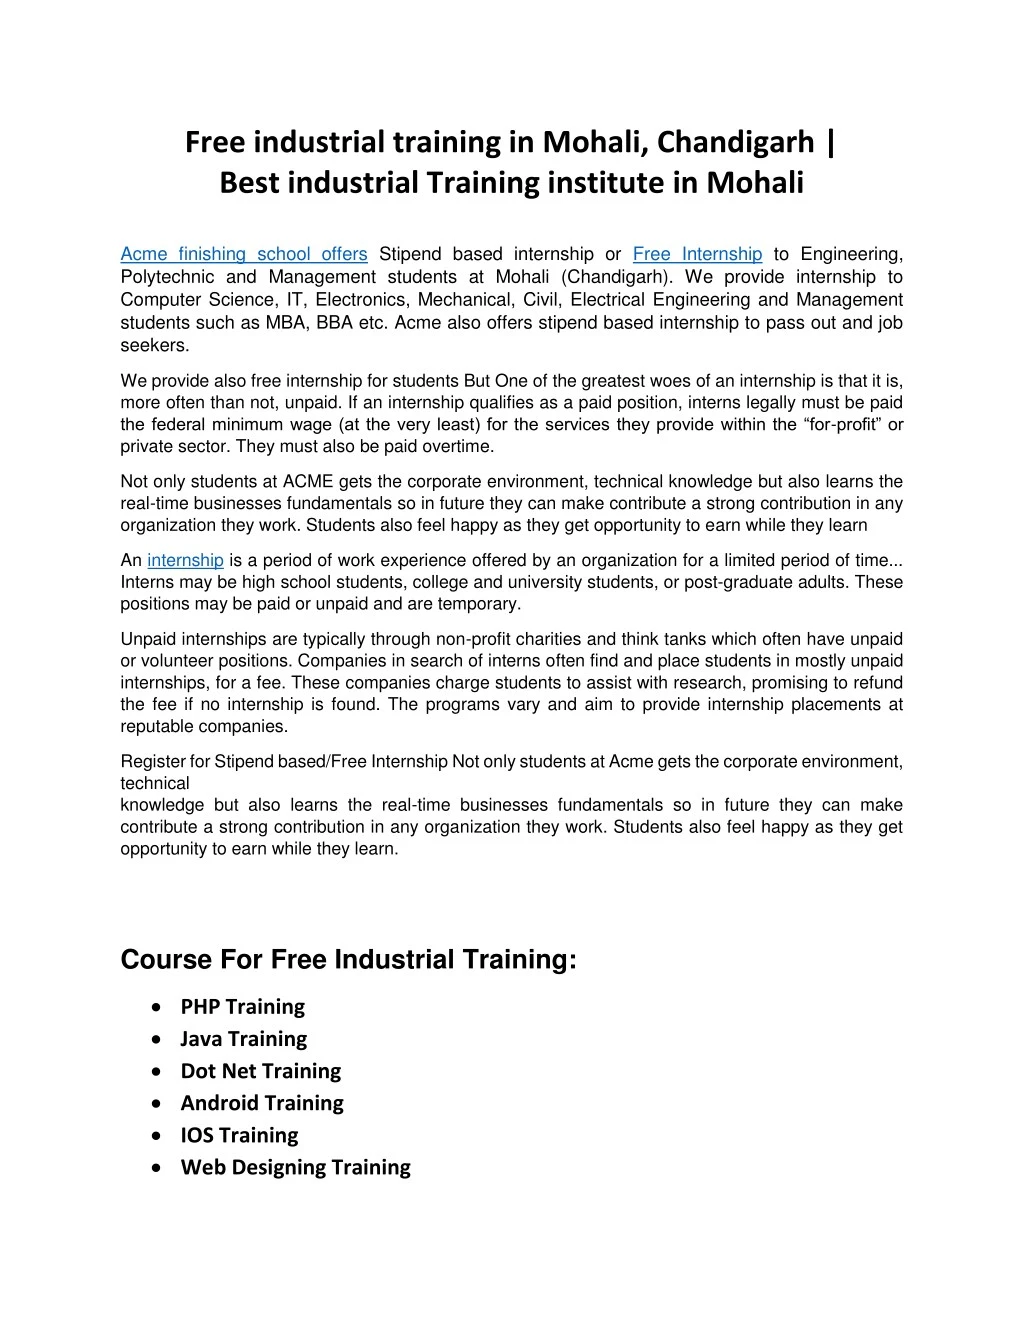 free industrial training in mohali chandigarh